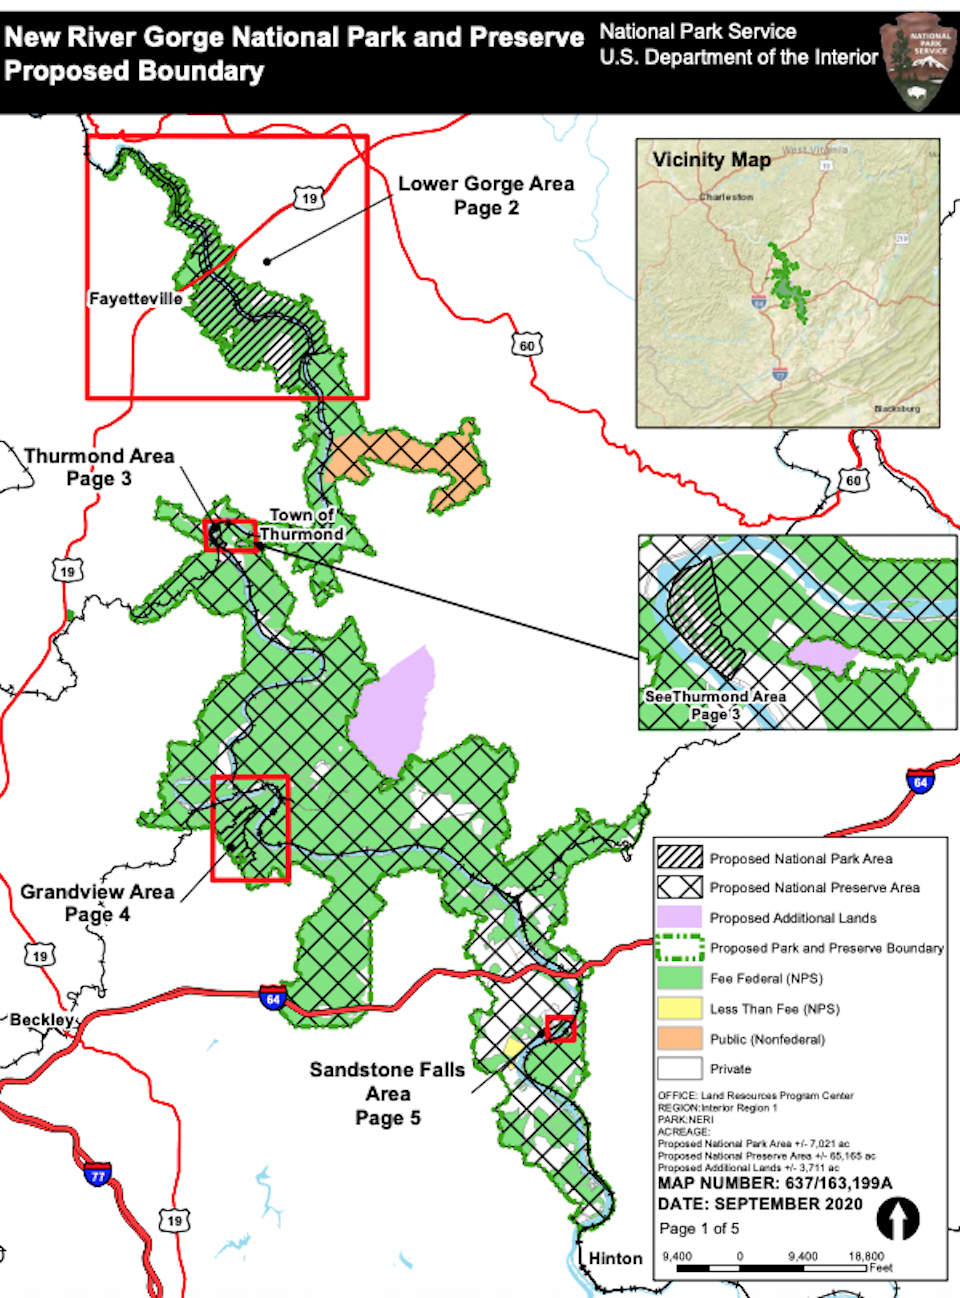 The four areas carrying "national park" distinction (in red boxes) are spread out across the New River Gorge/NPS